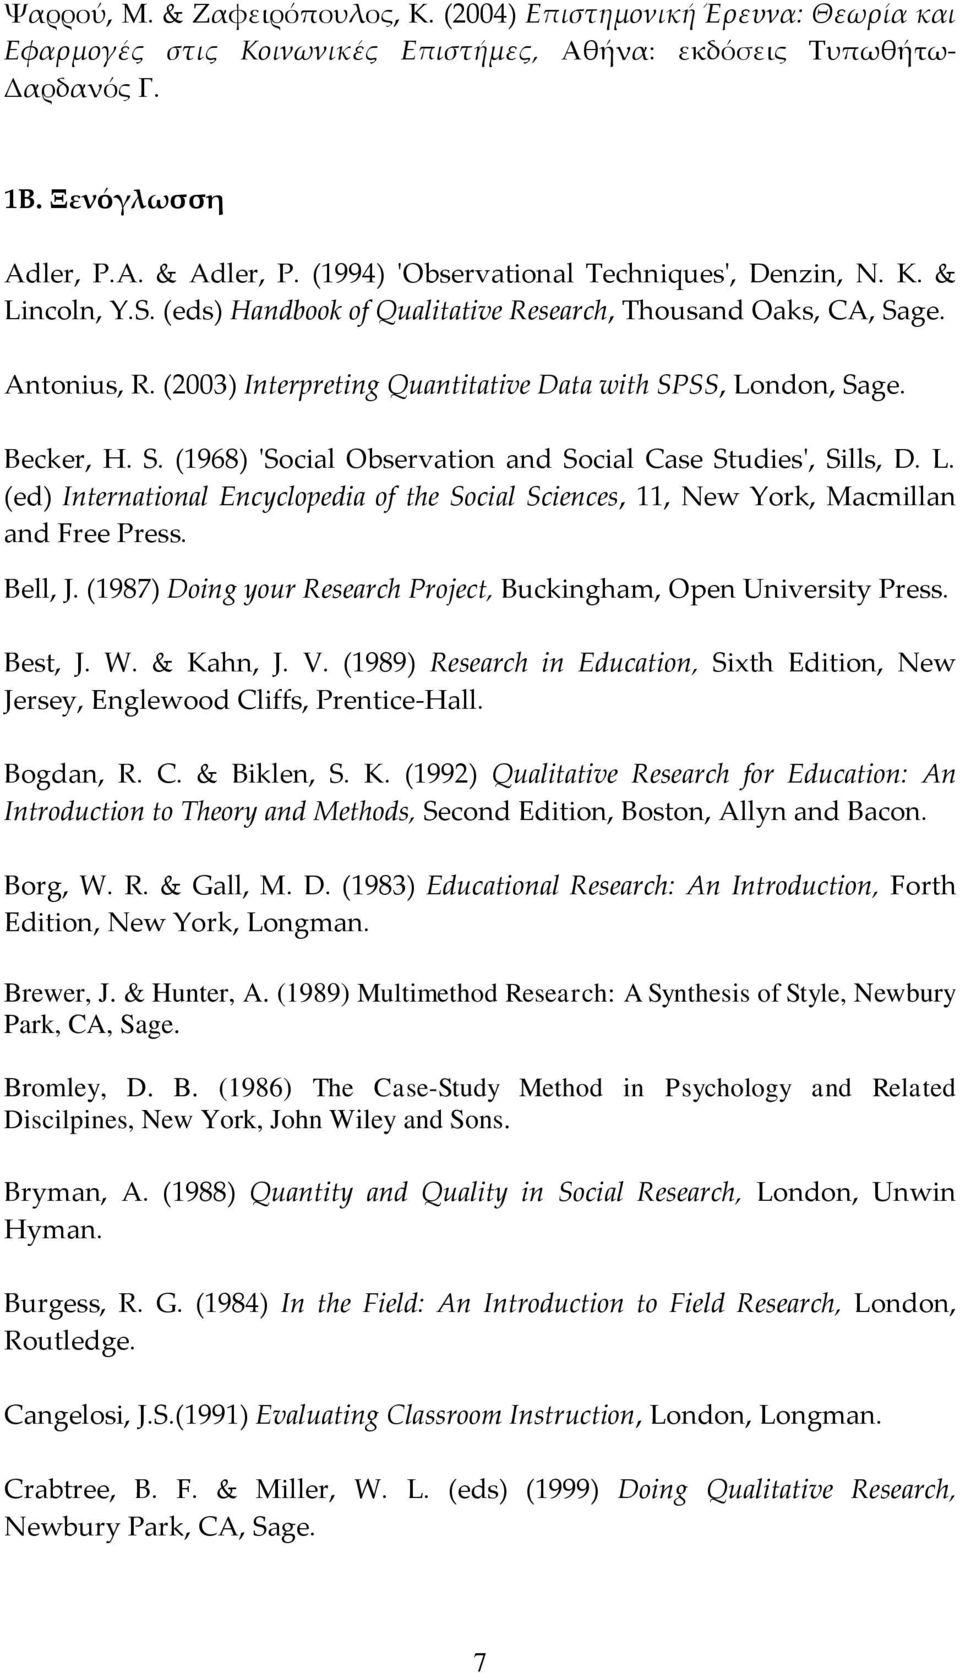 (2003) Interpreting Quantitative Data with SPSS, London, Sage. Becker, H. S. (1968) 'Social Observation and Social Case Studies', Sills, D. L. (ed) International Encyclopedia of the Social Sciences, 11, New York, Macmillan and Free Press.